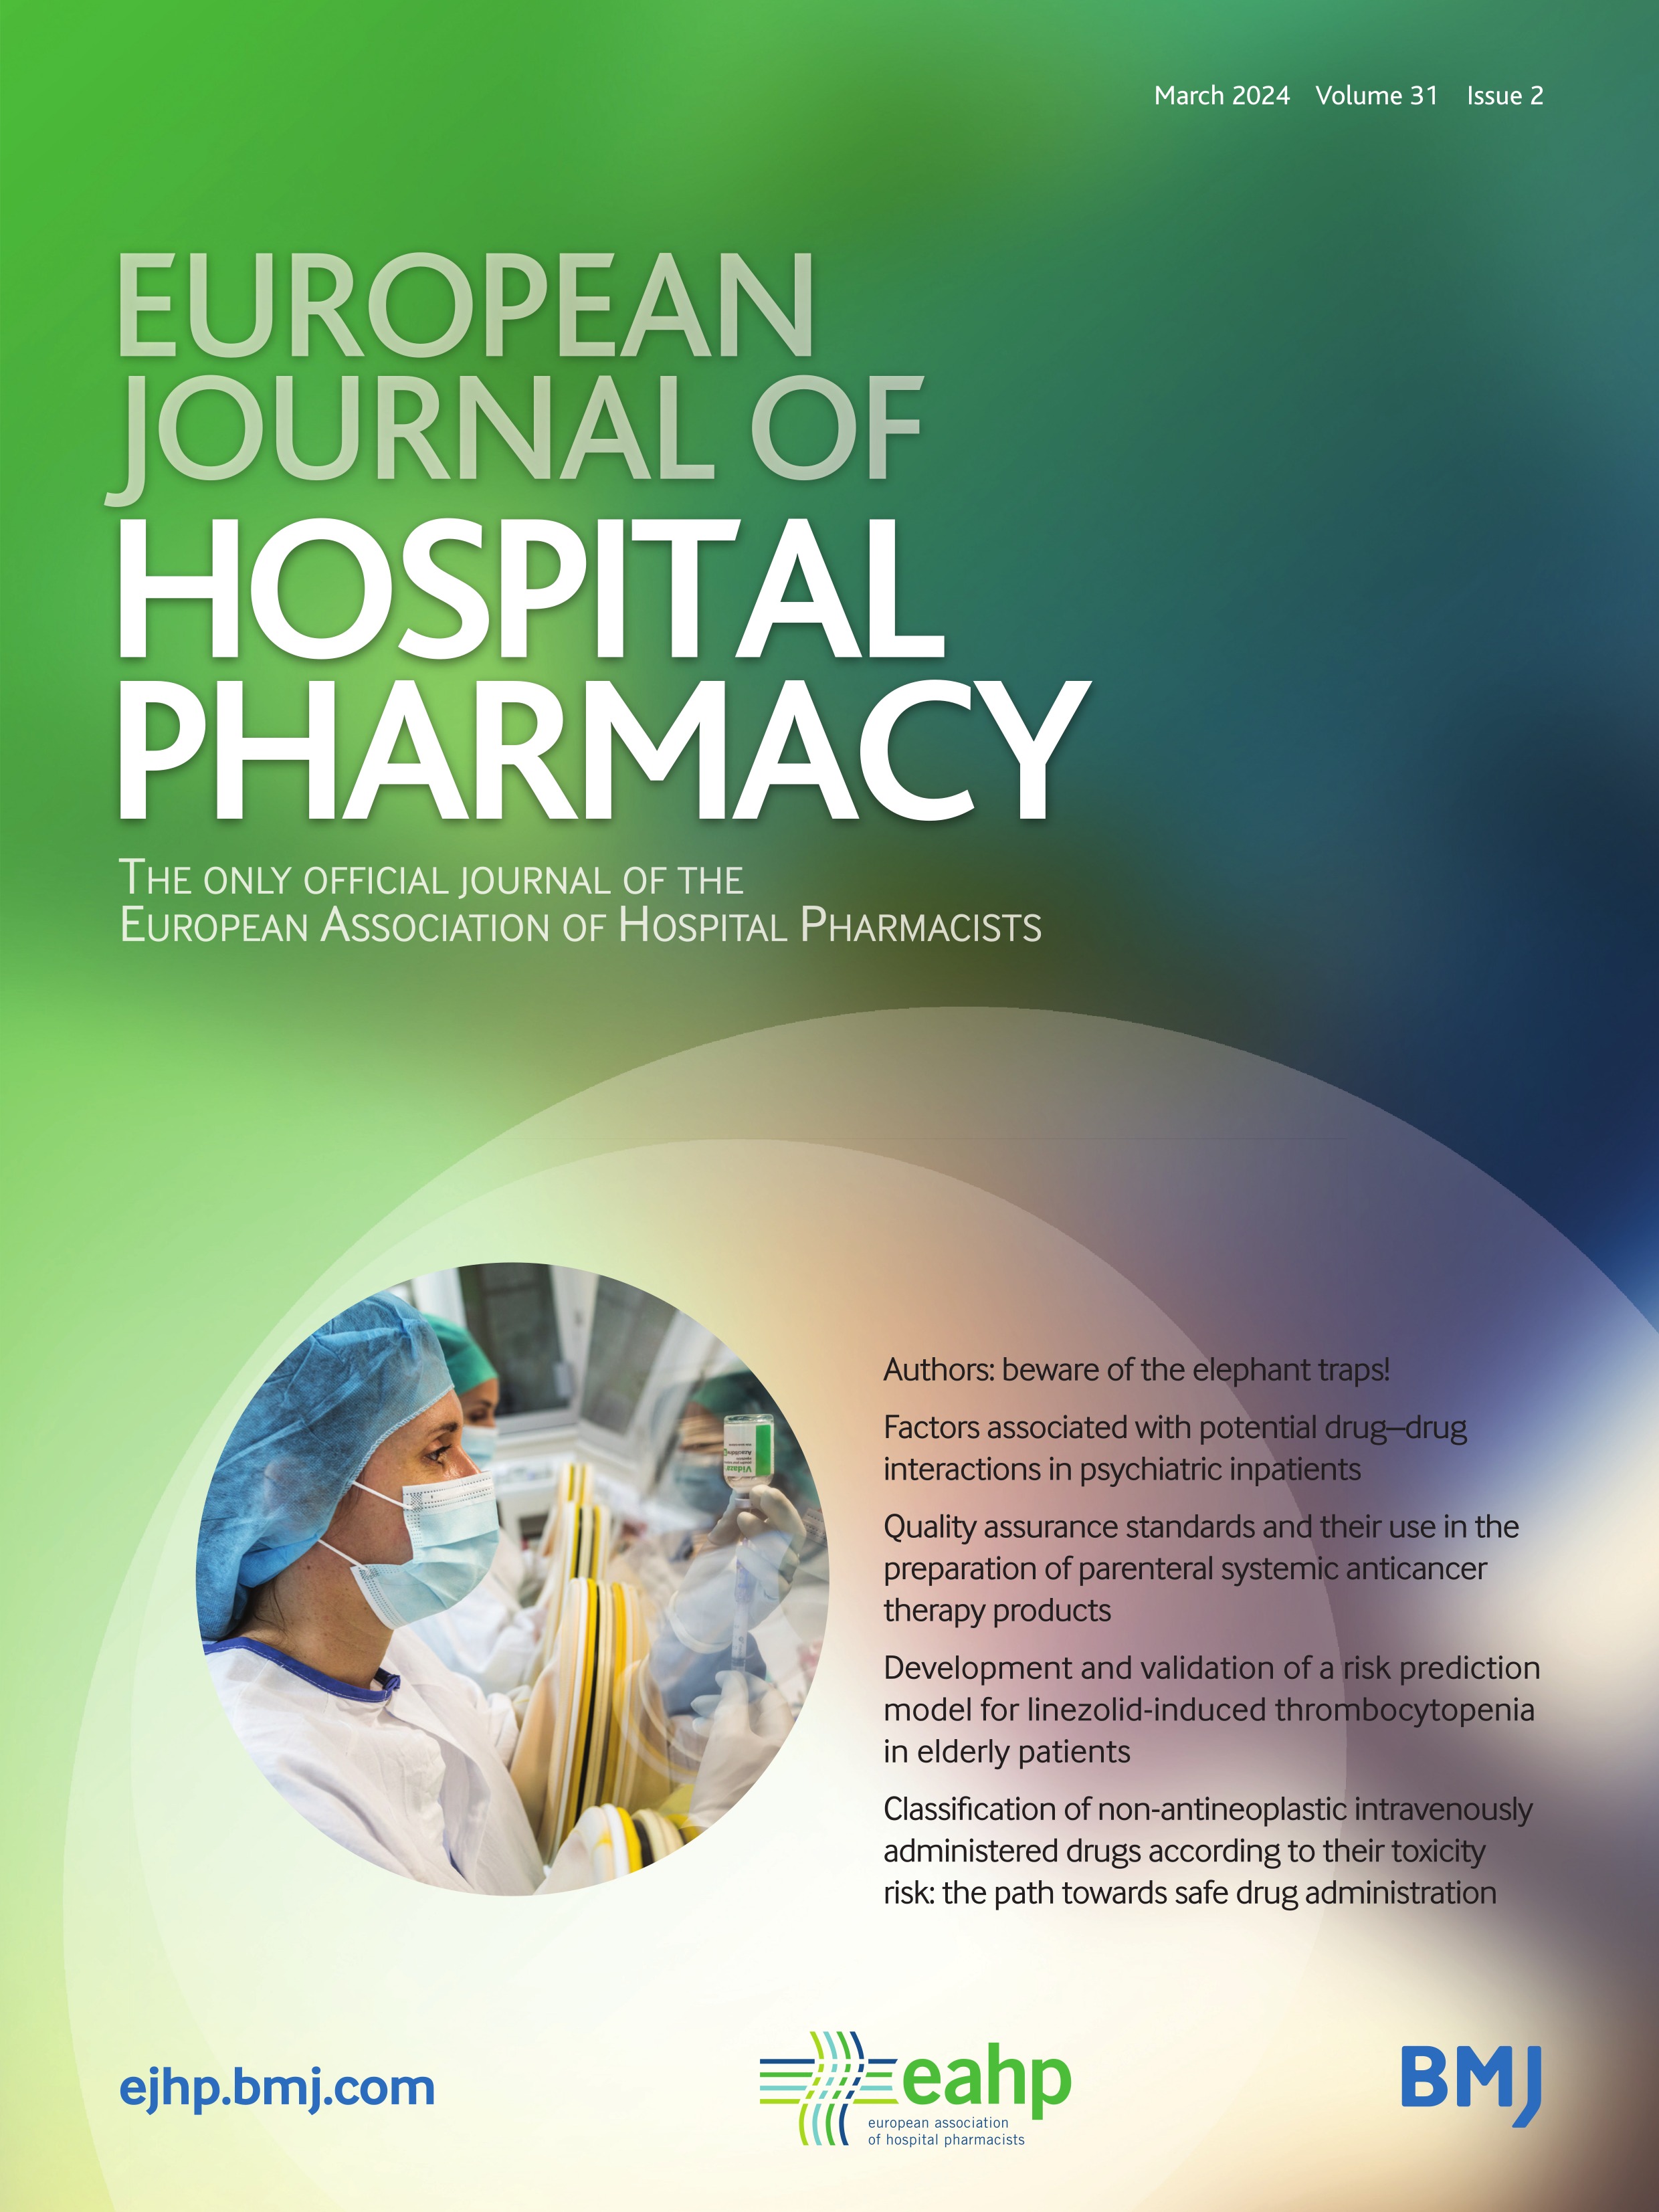 Factors influencing accuracy when preparing injectable drug concentrations in appliance with clinical practice: a norepinephrine case study